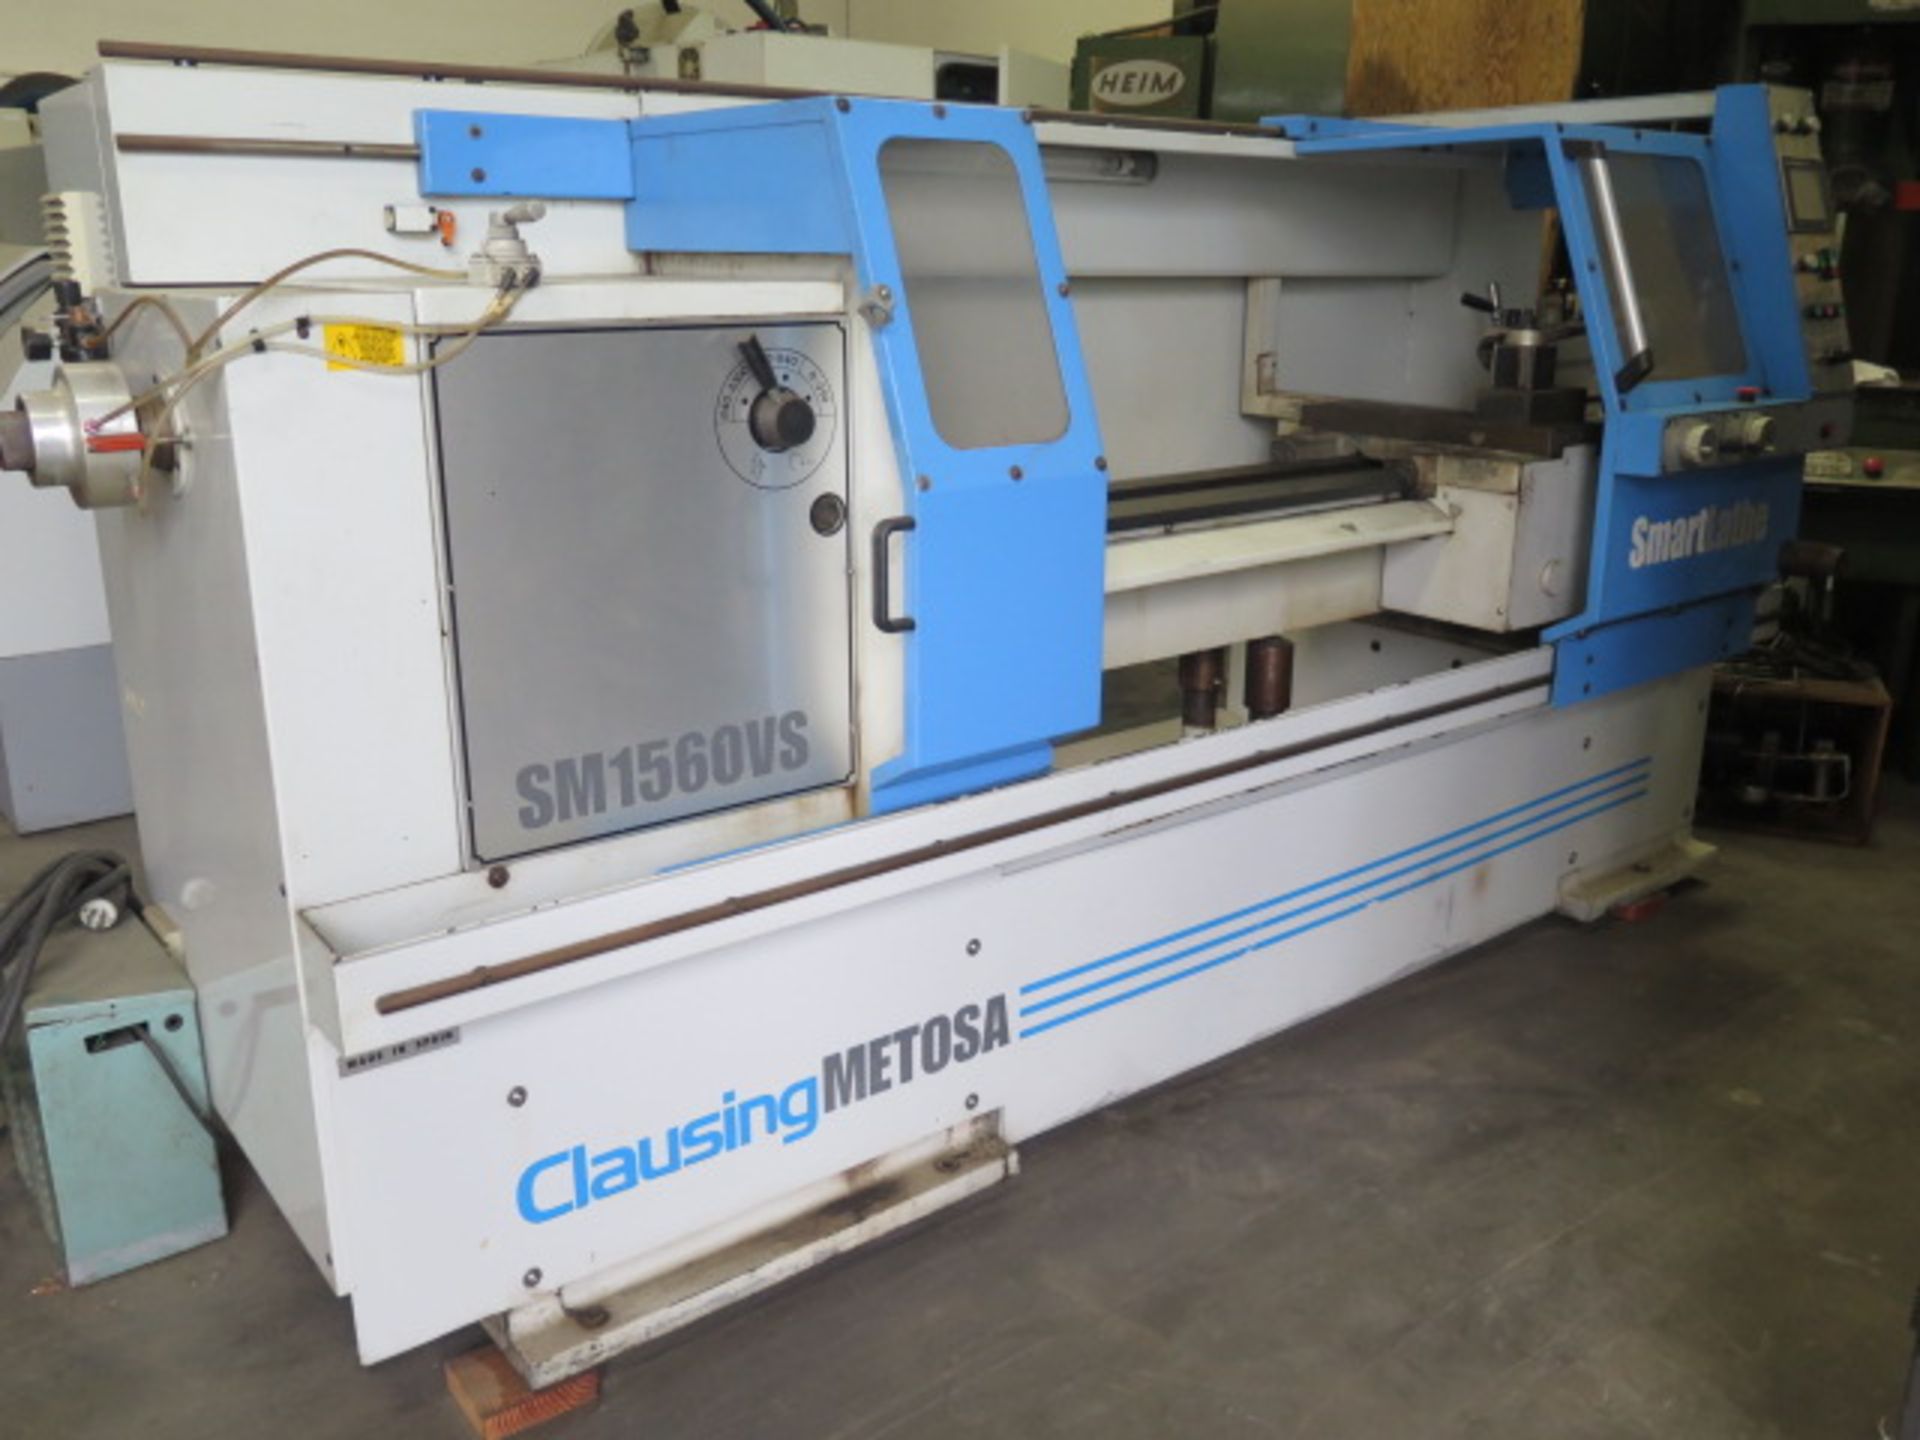 2001 Clausing Metosa SM1560VS 15” x 60” “Smart Lathe” Soft CNC Gap Bed lathe, SOLD AS IS - Image 2 of 14